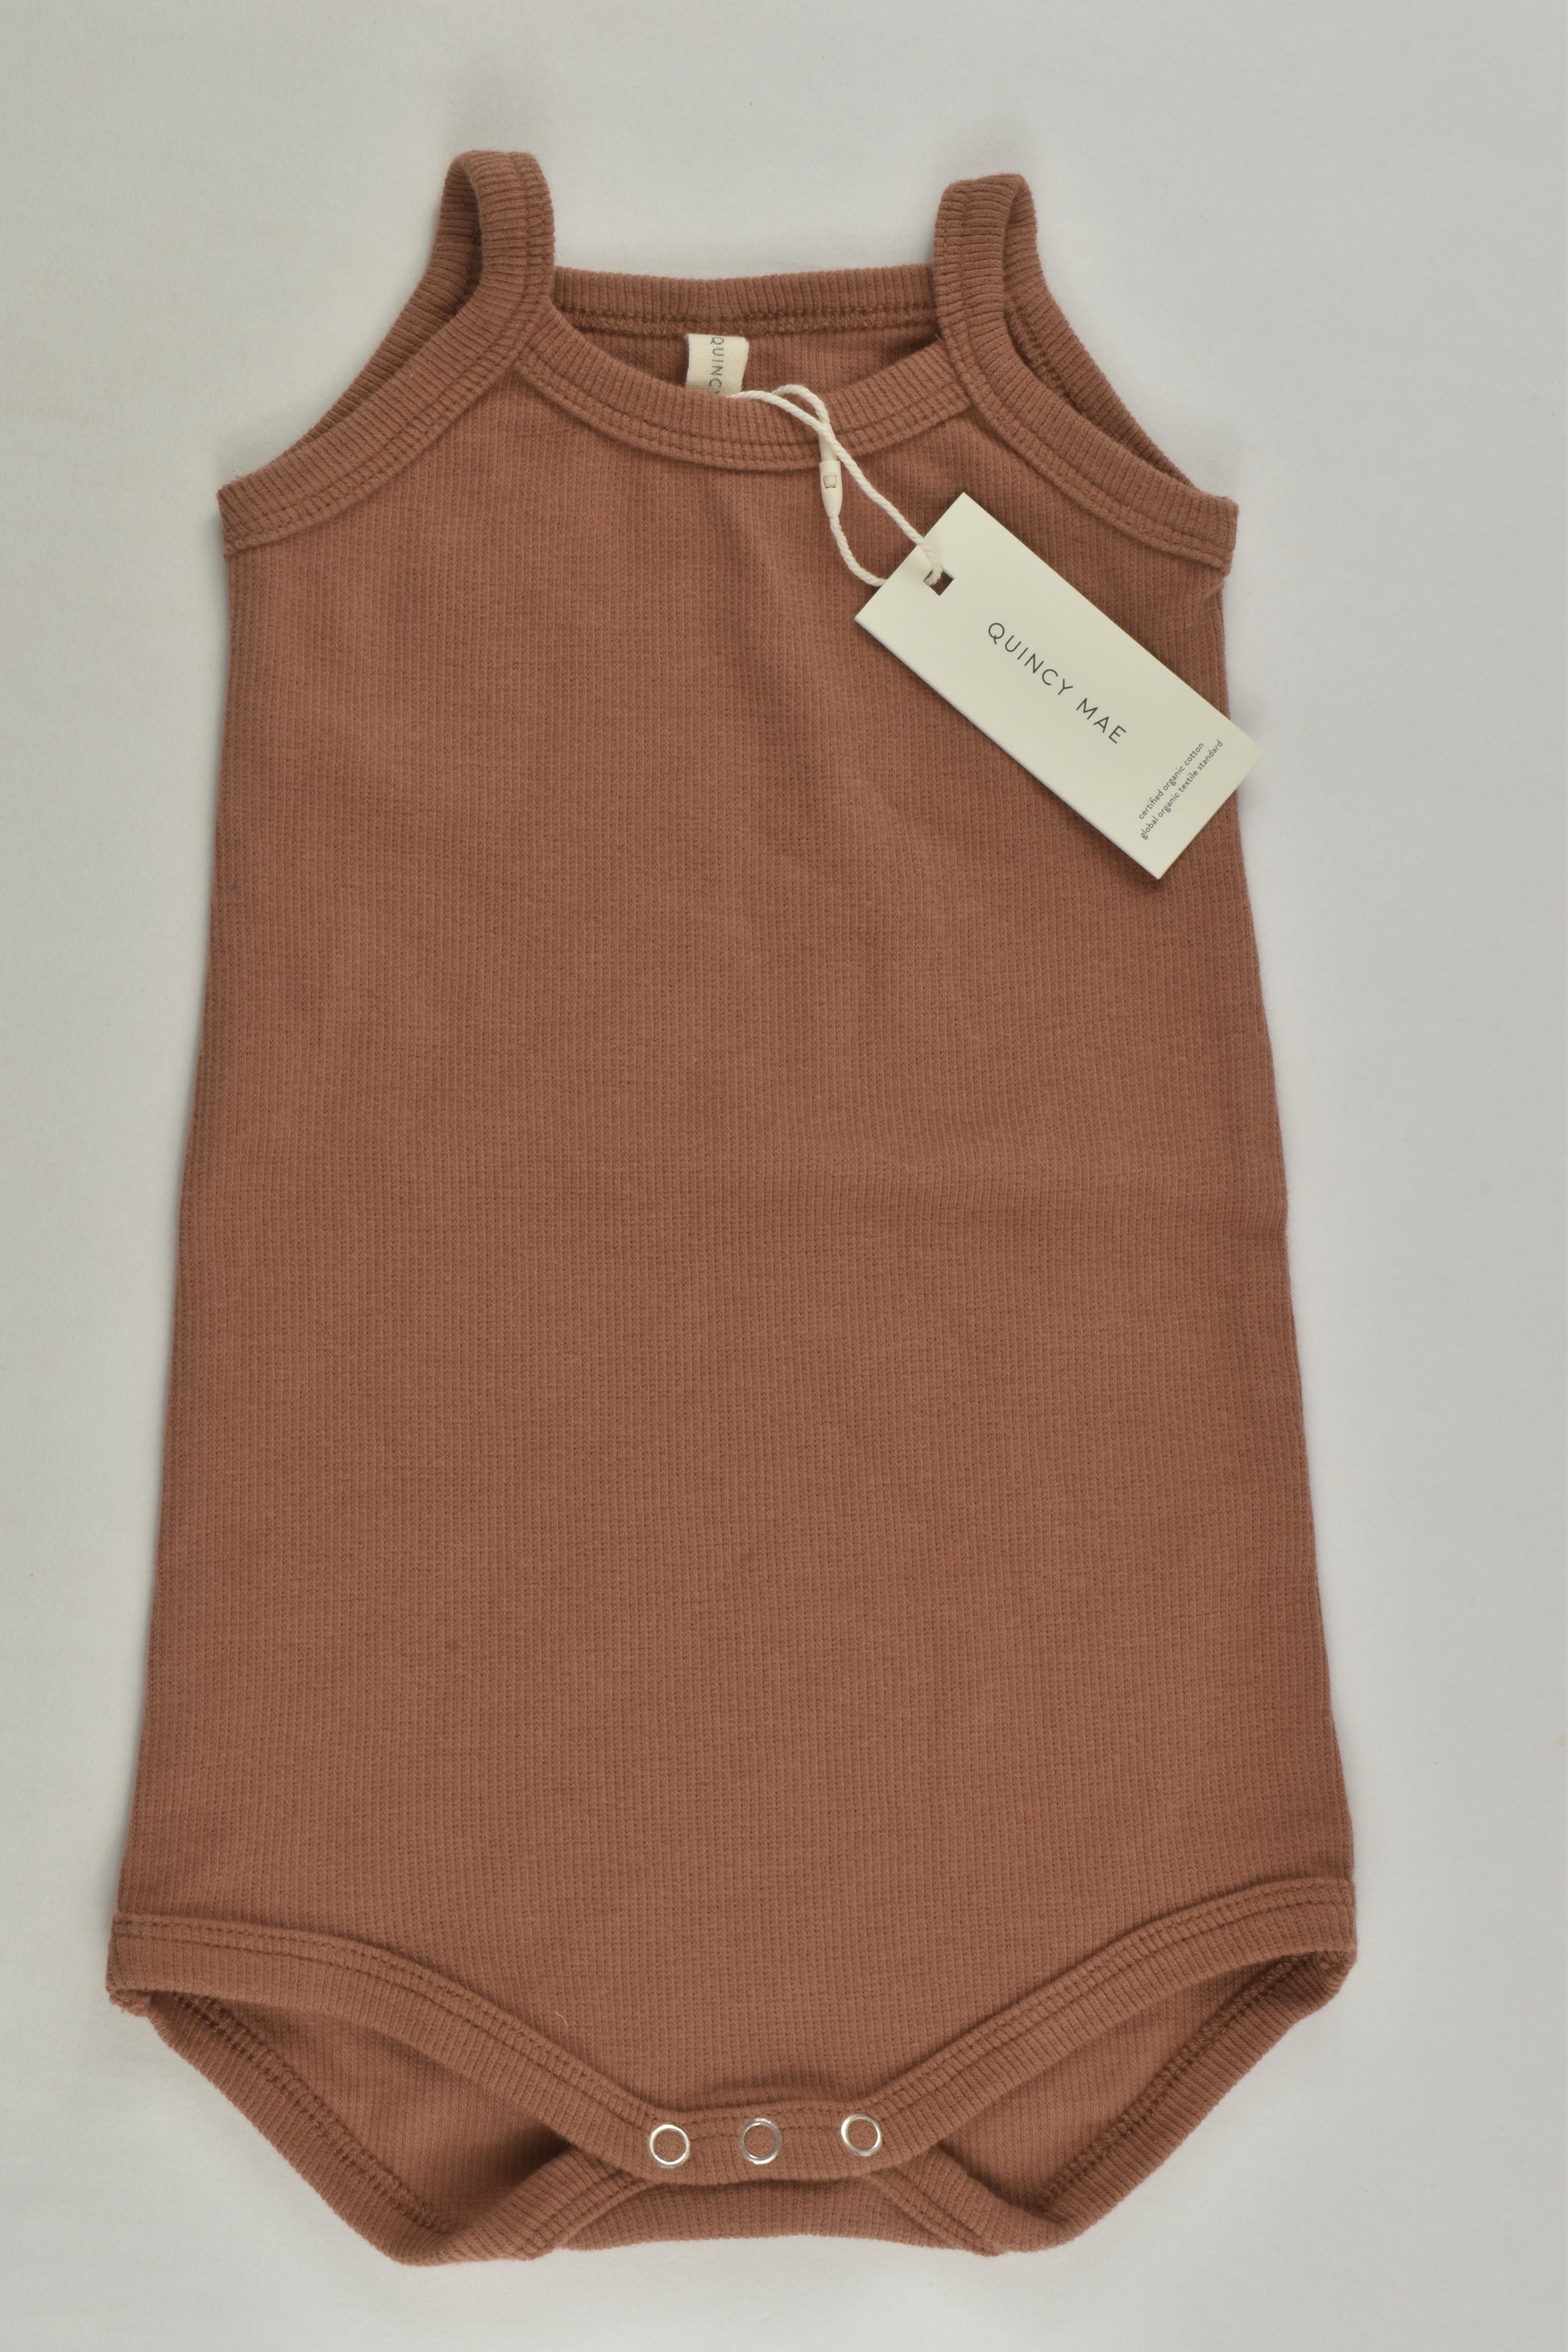 NEW Quincy Mae Size 0 Ribbed Bodysuit